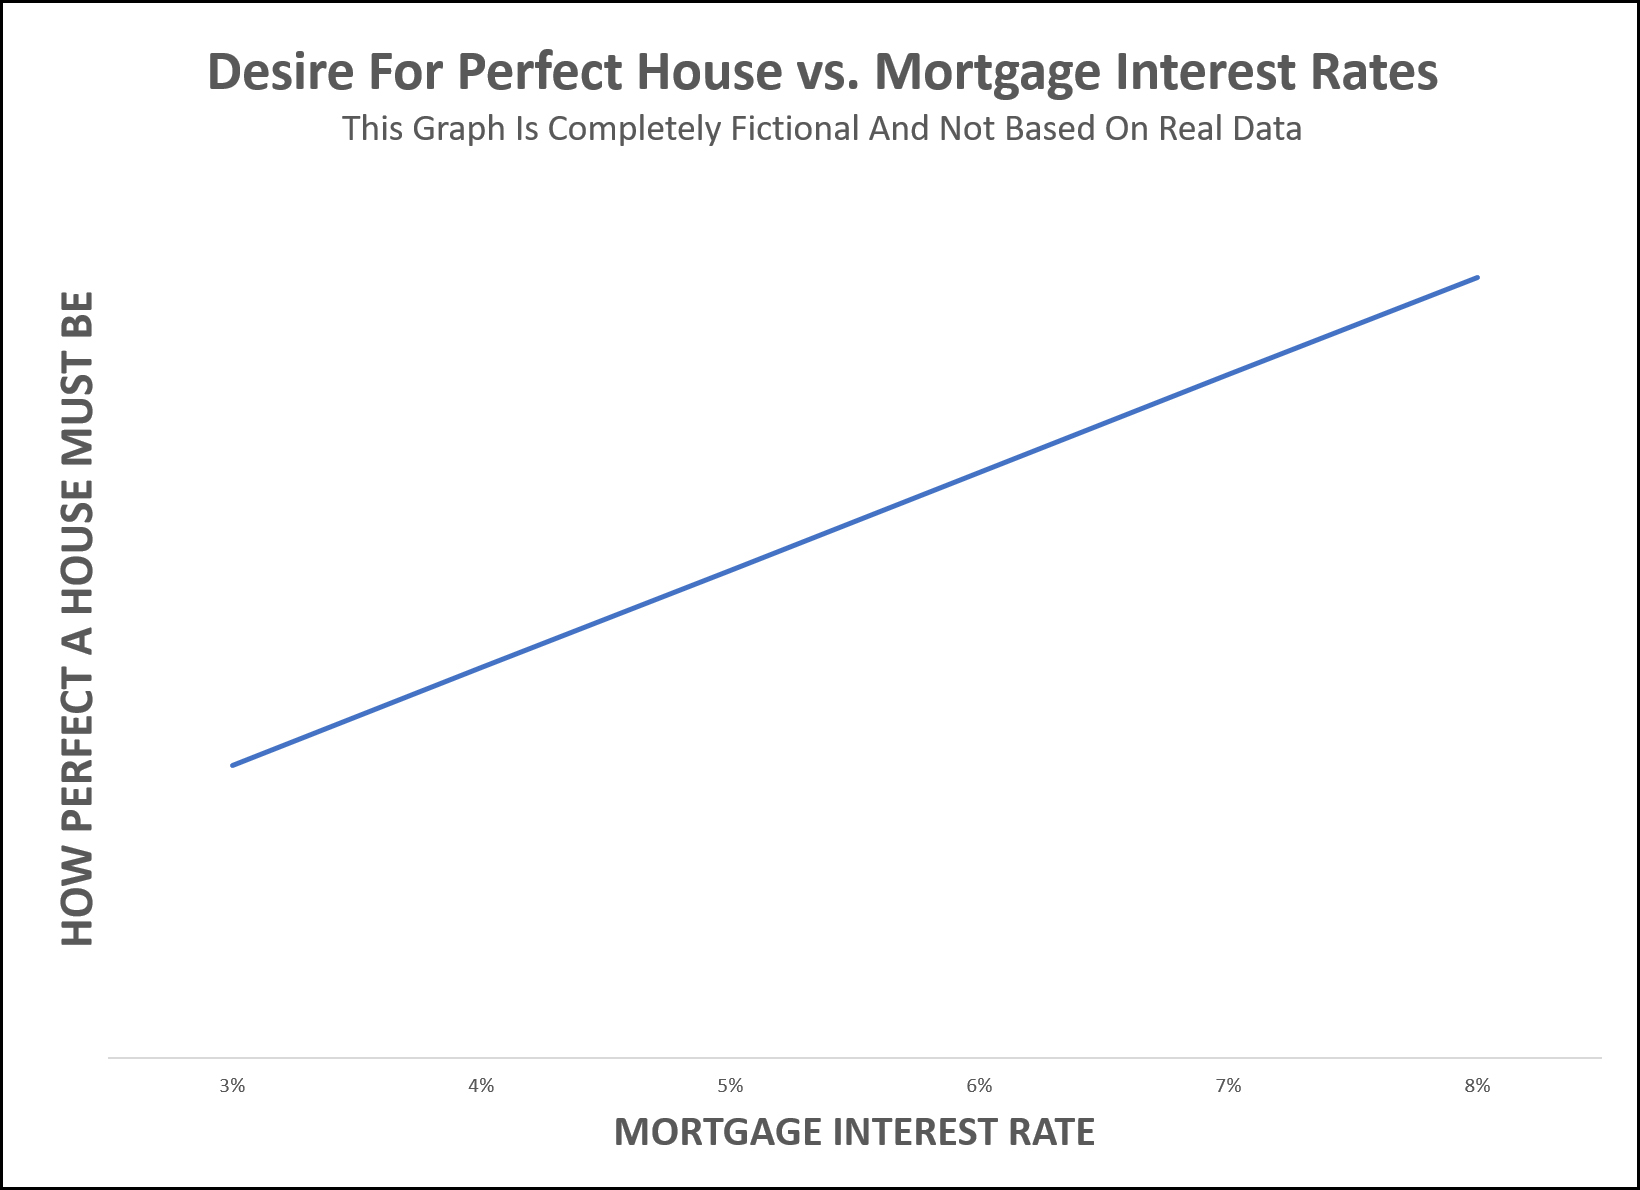 Mortgage Interest Rates, Home Perfection